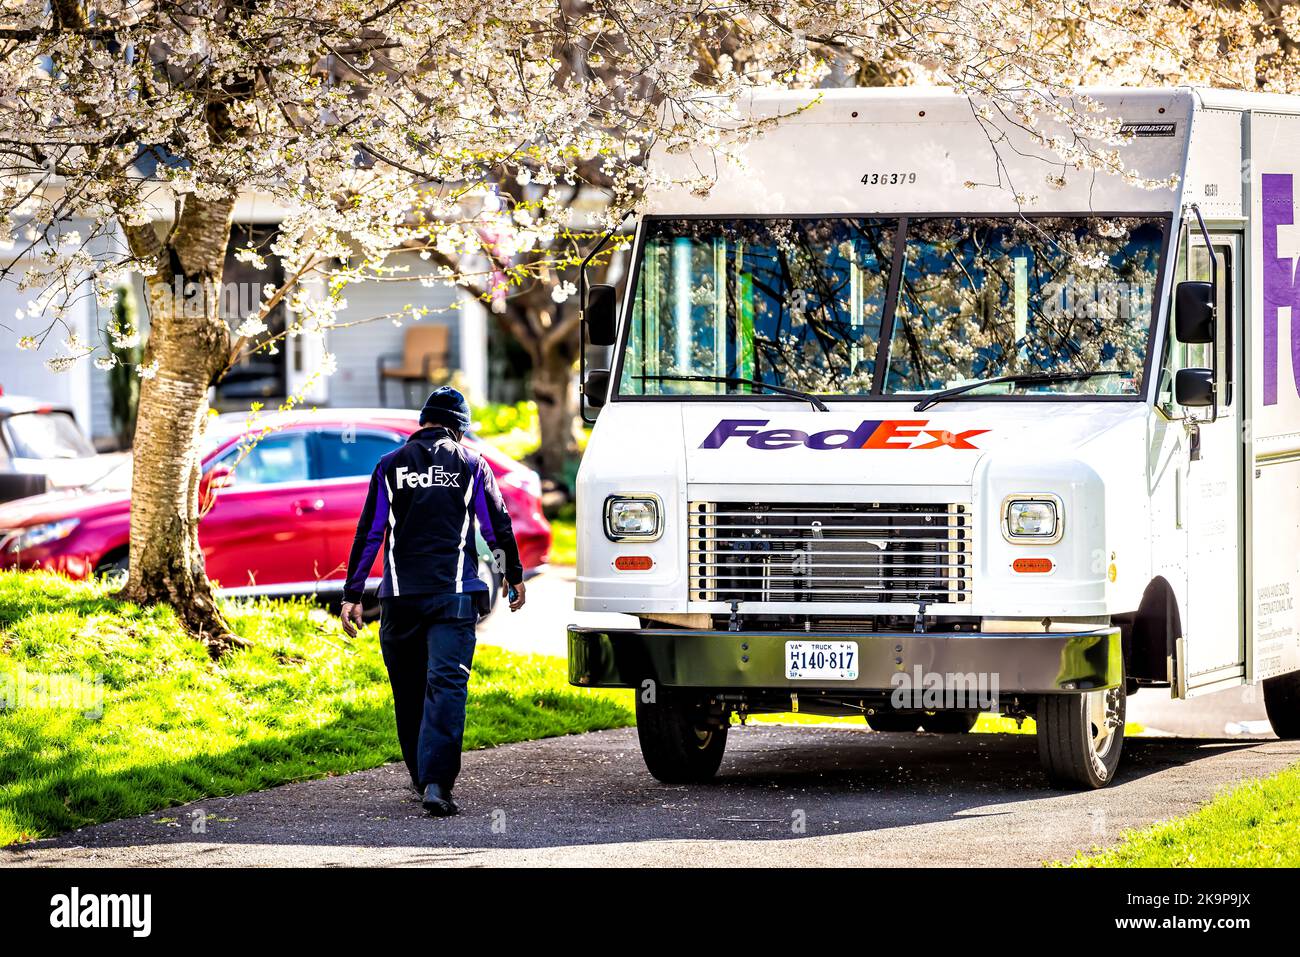 Herndon, USA - April 3, 2021: Fairfax county city, Virginia with residential neighborhood in spring with FedEx truck worker delivering package Stock Photo